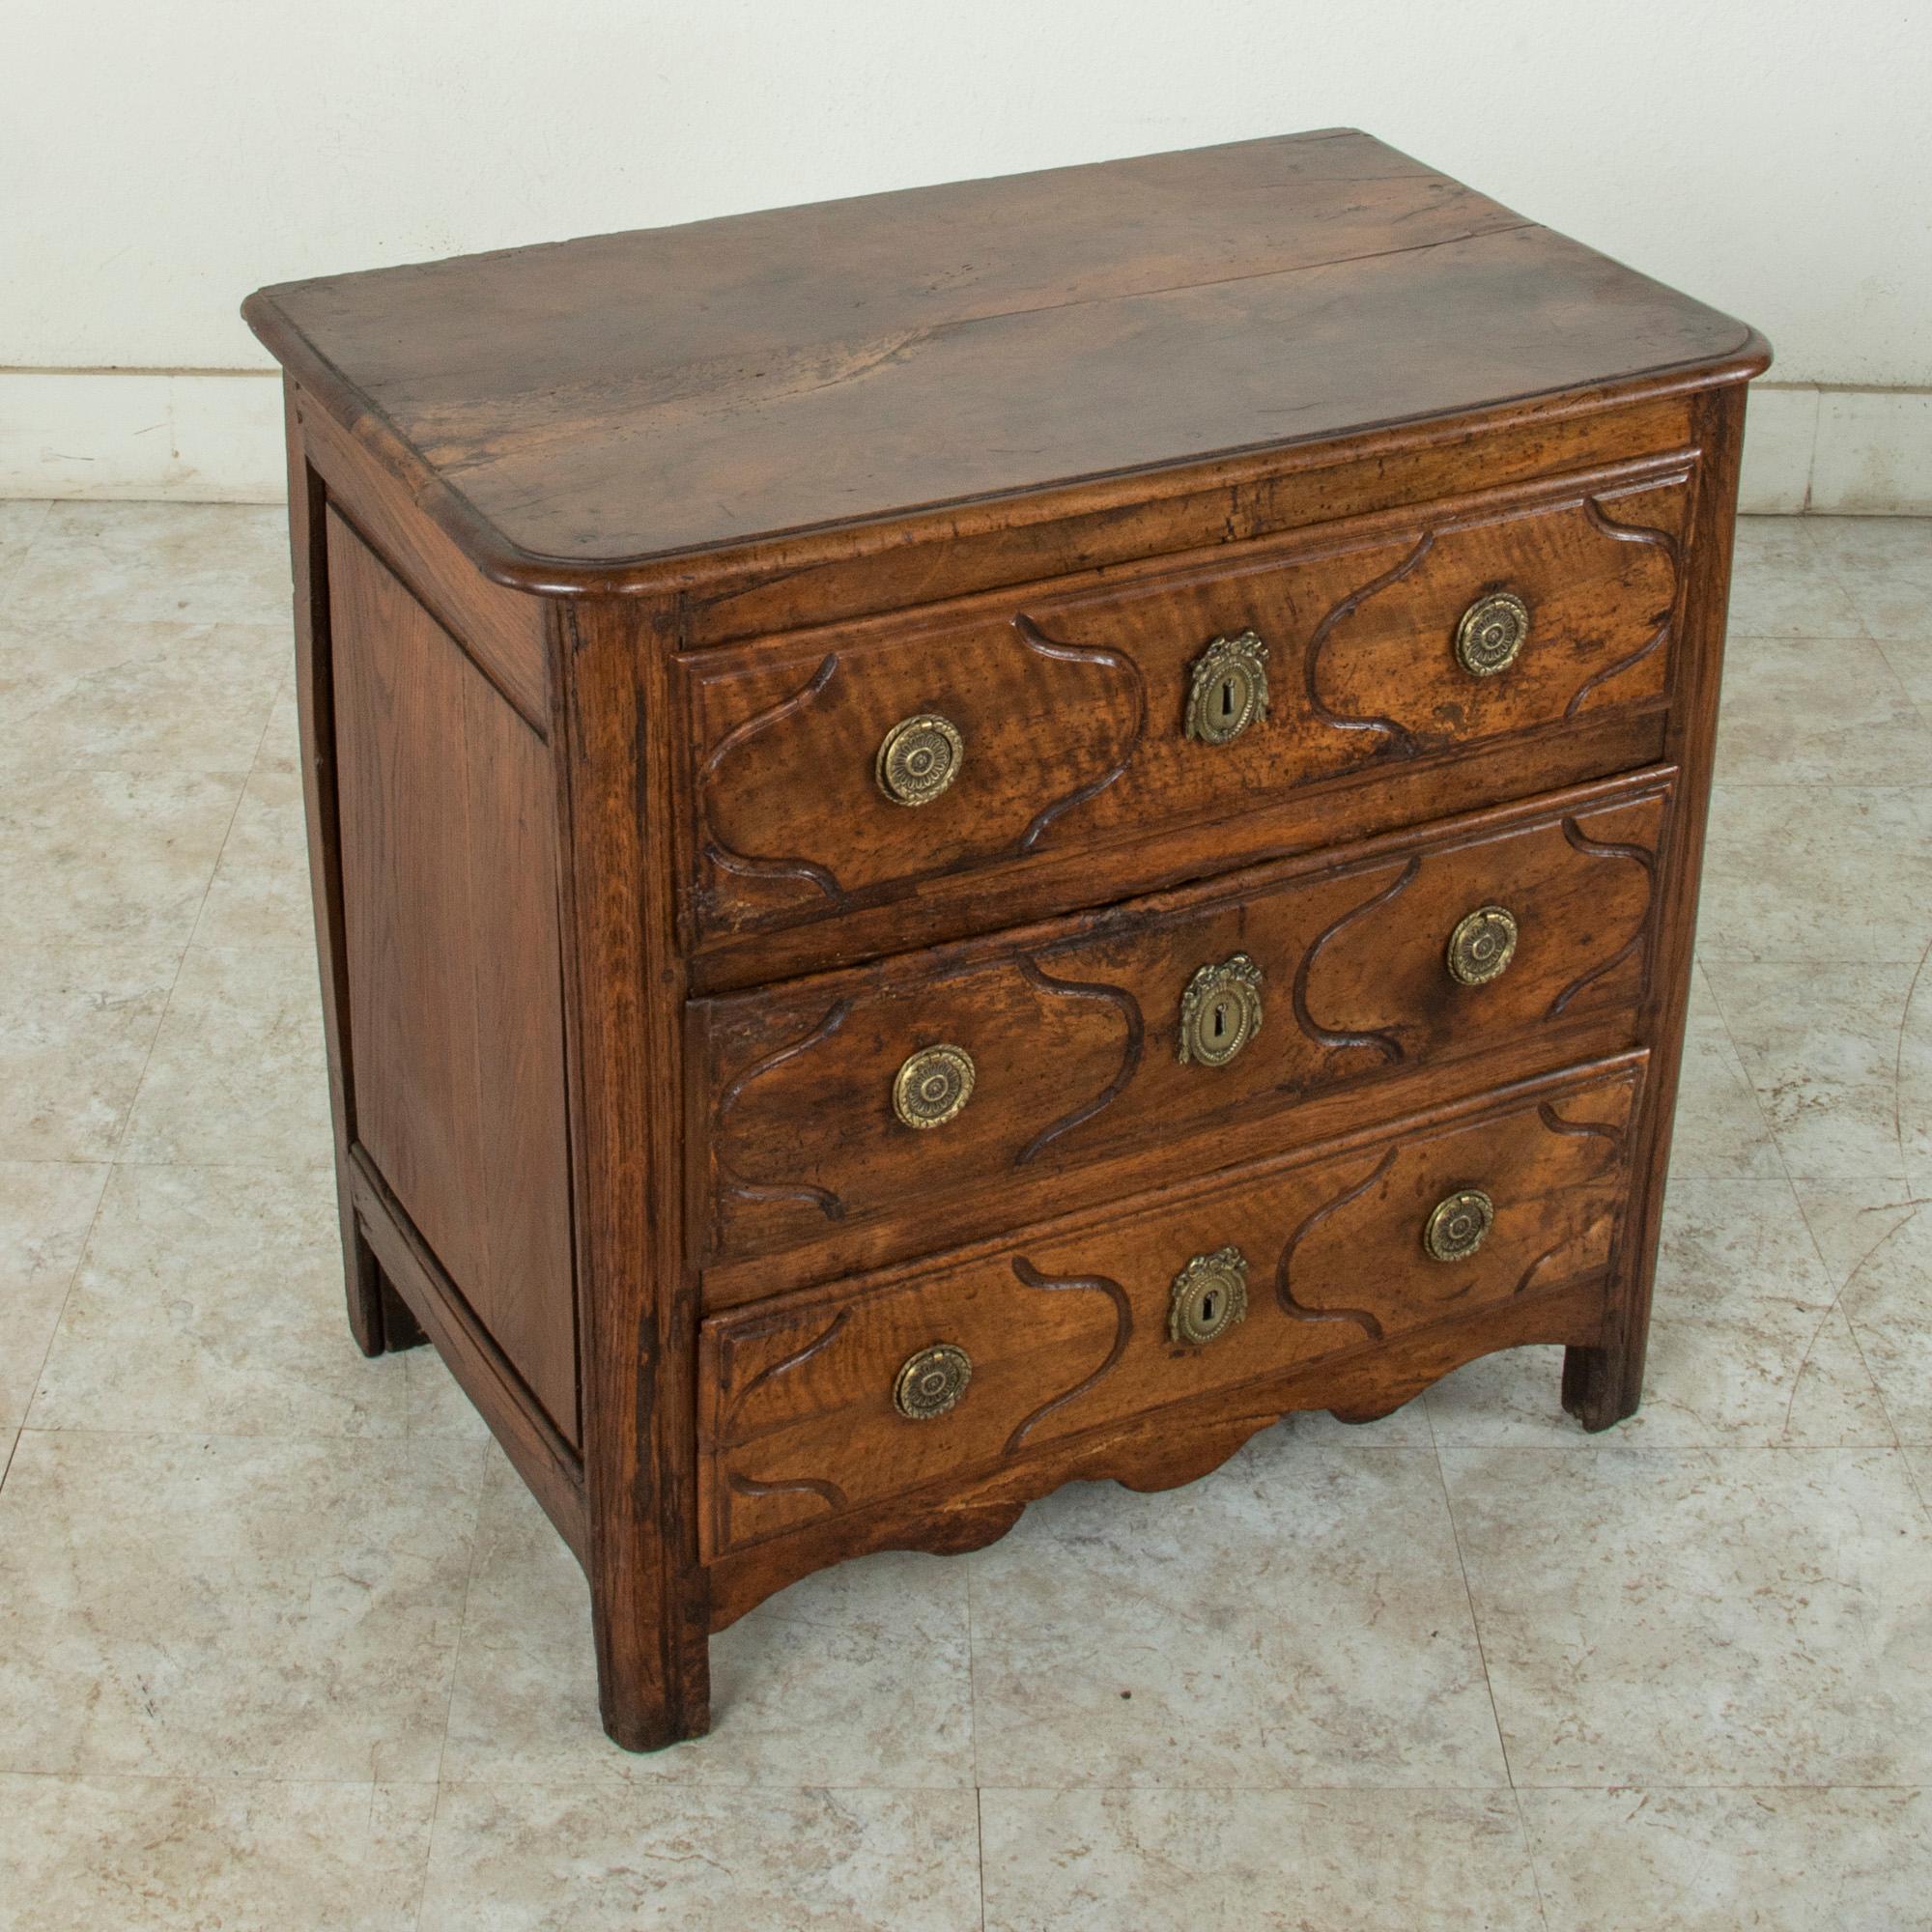 Of an unusual small scale, this 18th century French Louis XIV period commode or chest is constructed of solid hand carved walnut with paneled sides and beveled top. Originally created for a Paris apartment in the Ile de France region, this piece